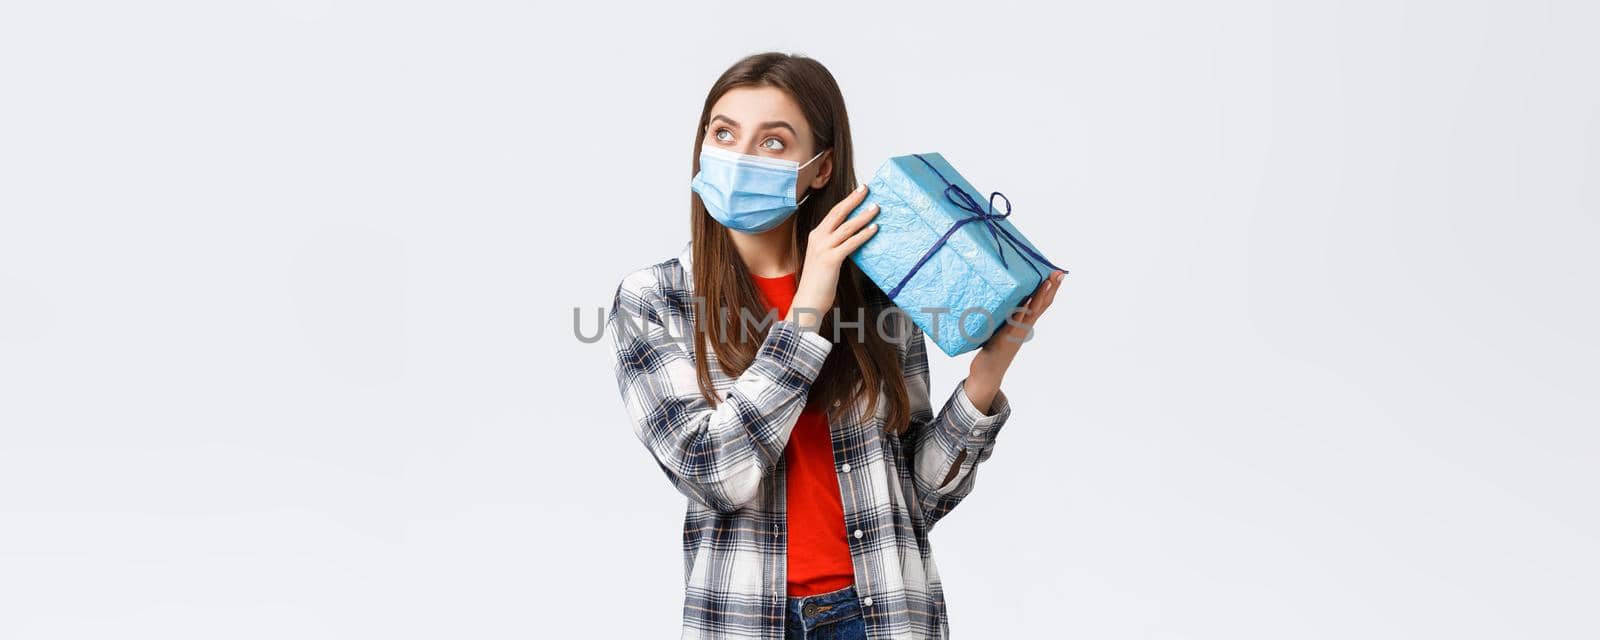 Covid-19, lifestyle, holidays and celebration concept. Curious young cute girl celebrating birthday, shaking gift box to guess what inside, look away thoughtful, lean ear to present, white background.